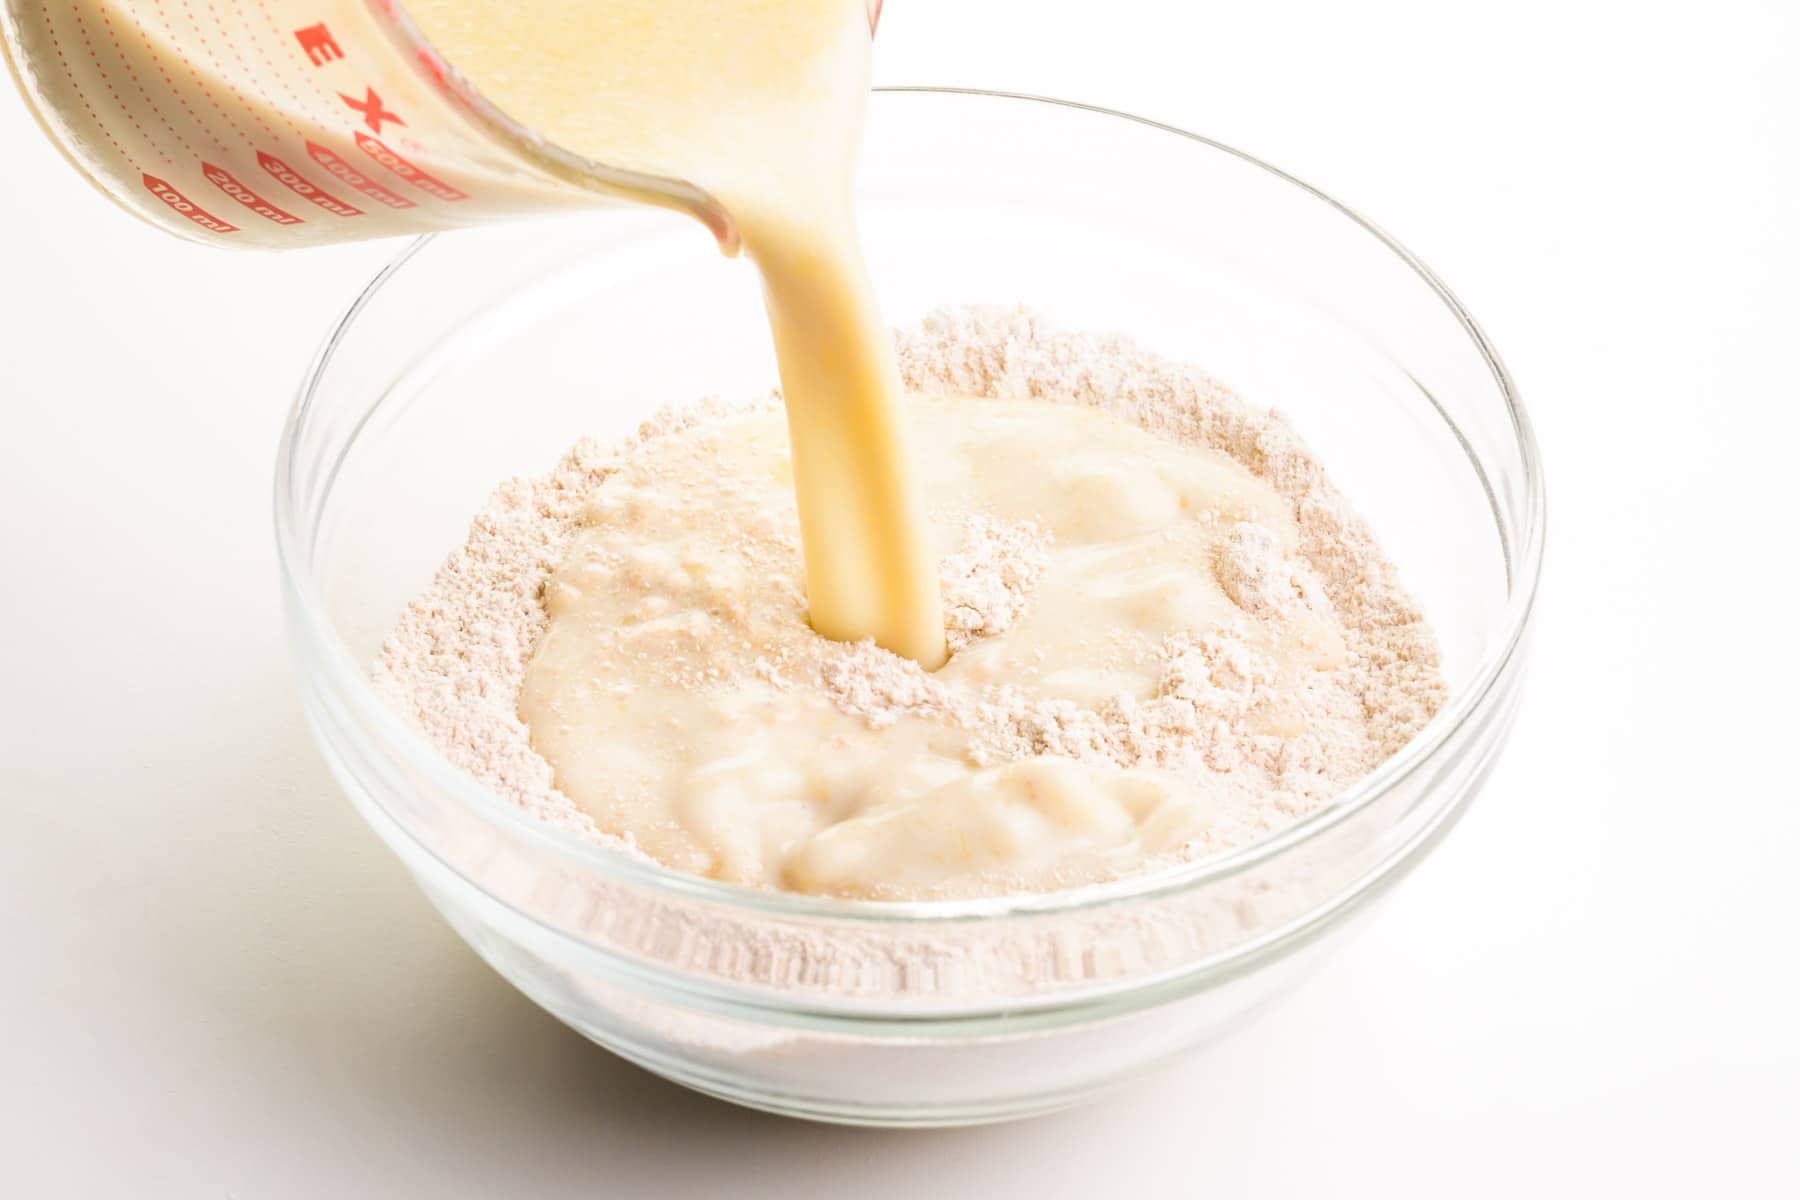 A milk mixture is being poured into a bowl with flour.